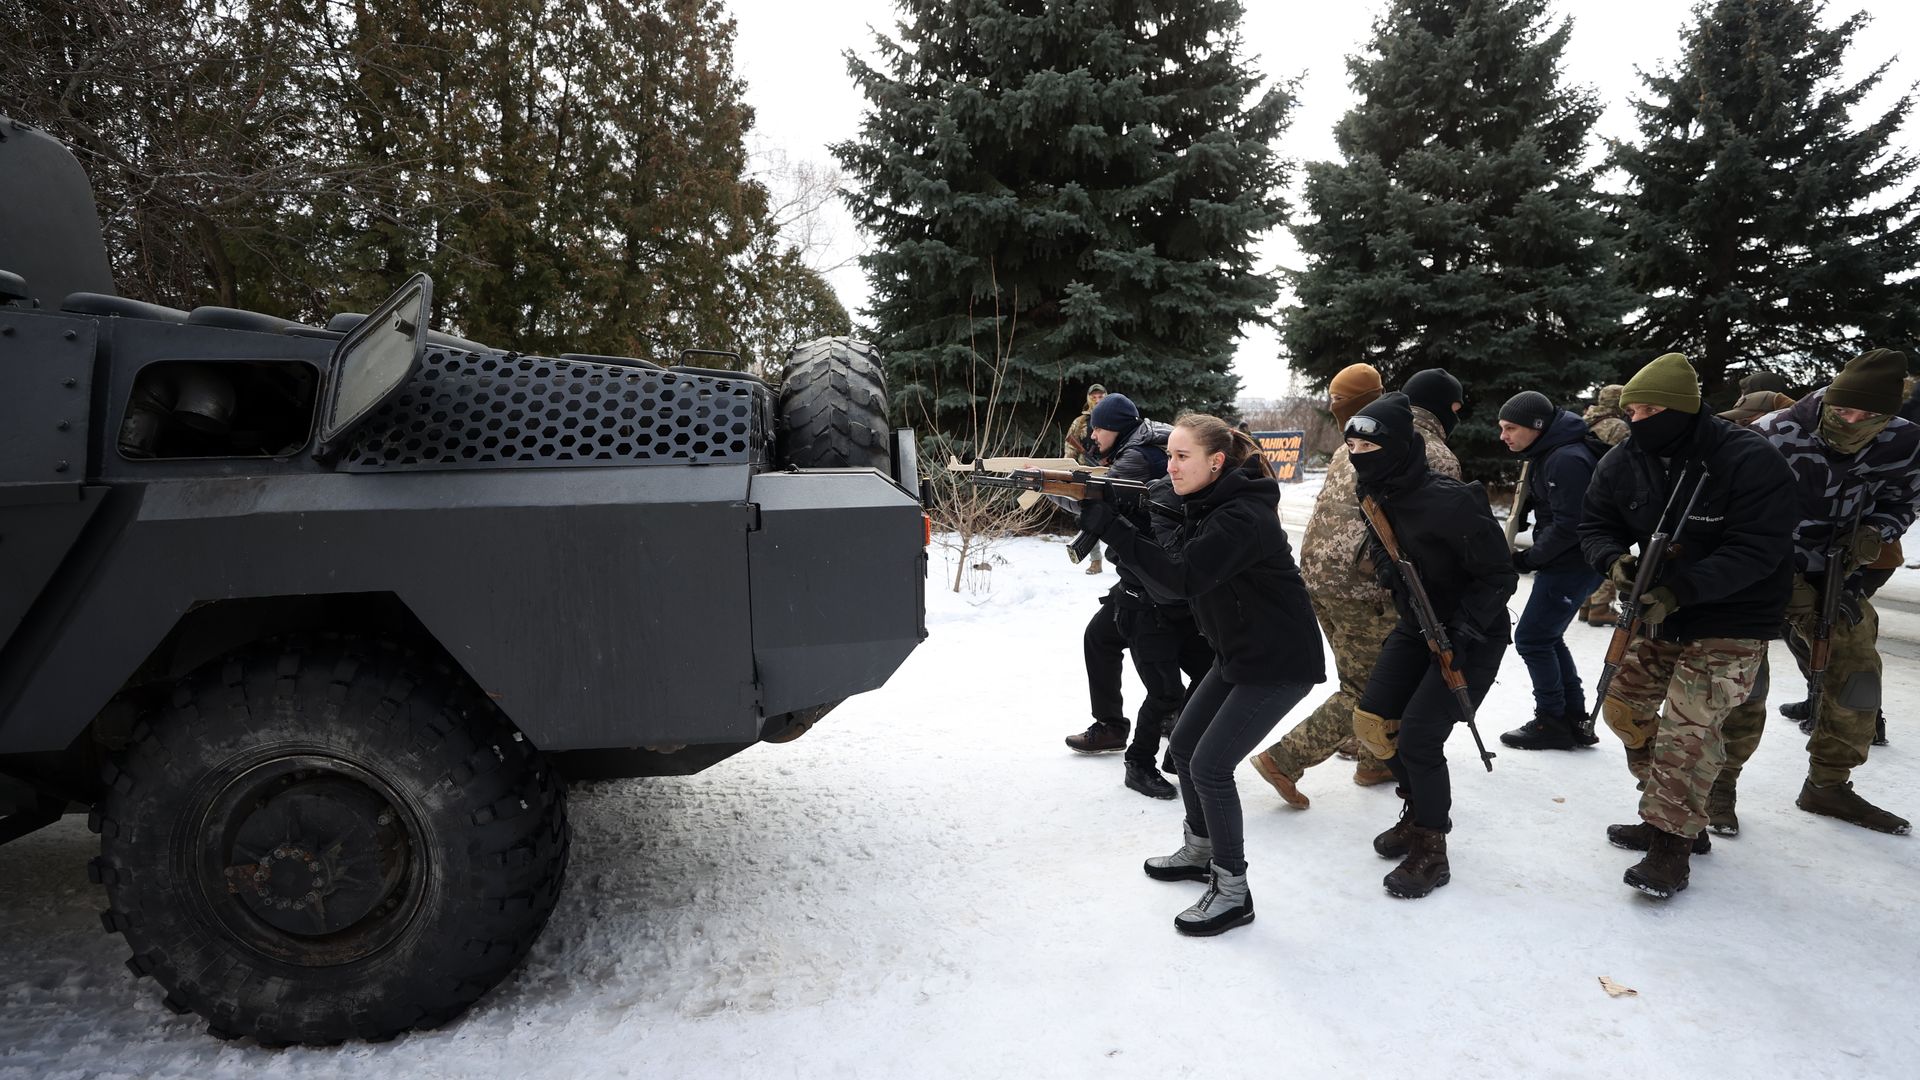 Ukrainian citizens are seen practicing to support the country's military against Russia.